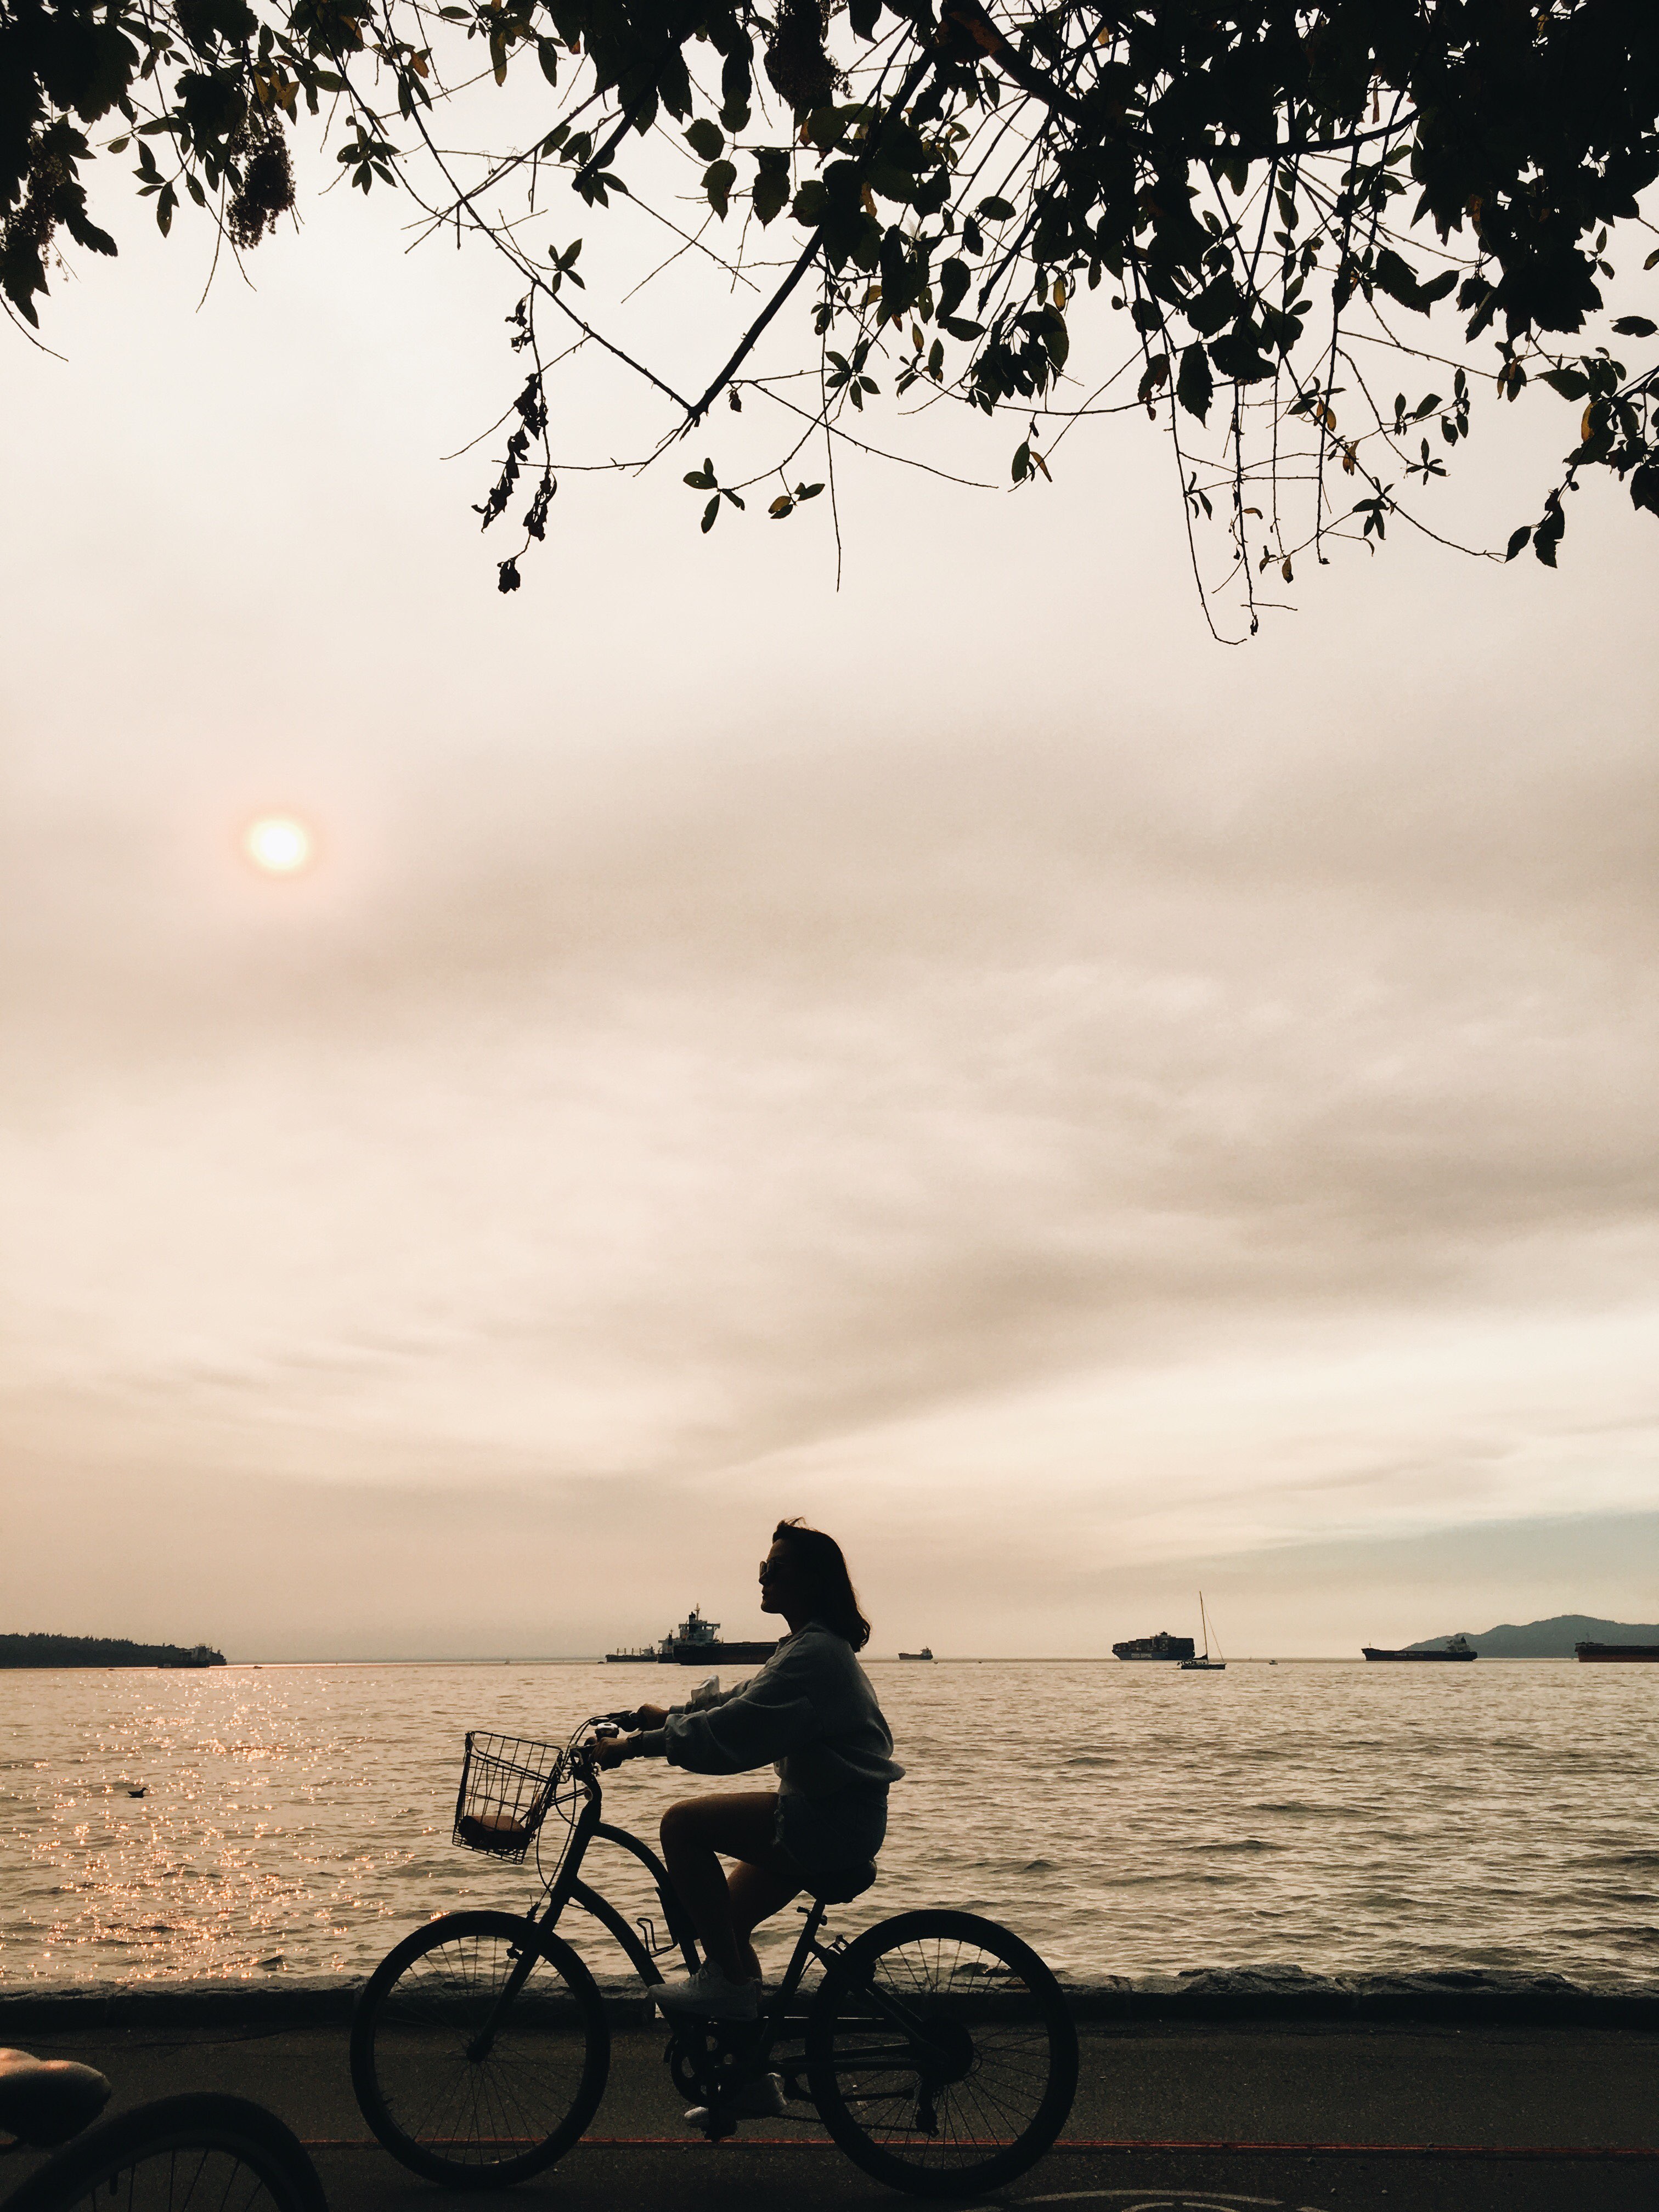 Silhouette of a woman biking by the water. The sky is cloudy and orange with smoke.